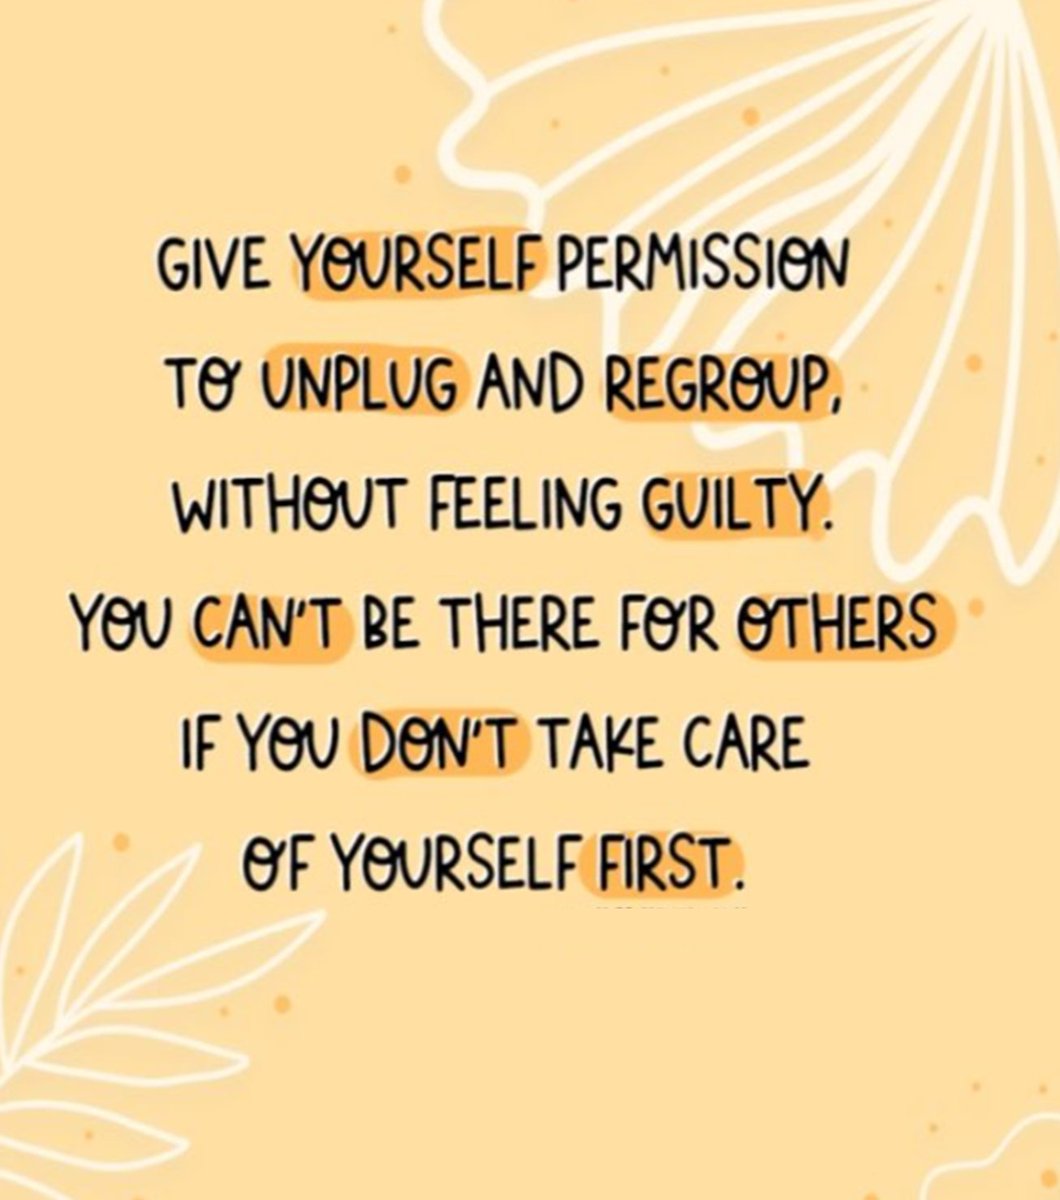 #thoughtfortheweek Give yourself permission to unplug and regroup without feeling guilty. You can't be there for others if you don't take care of yourself first.